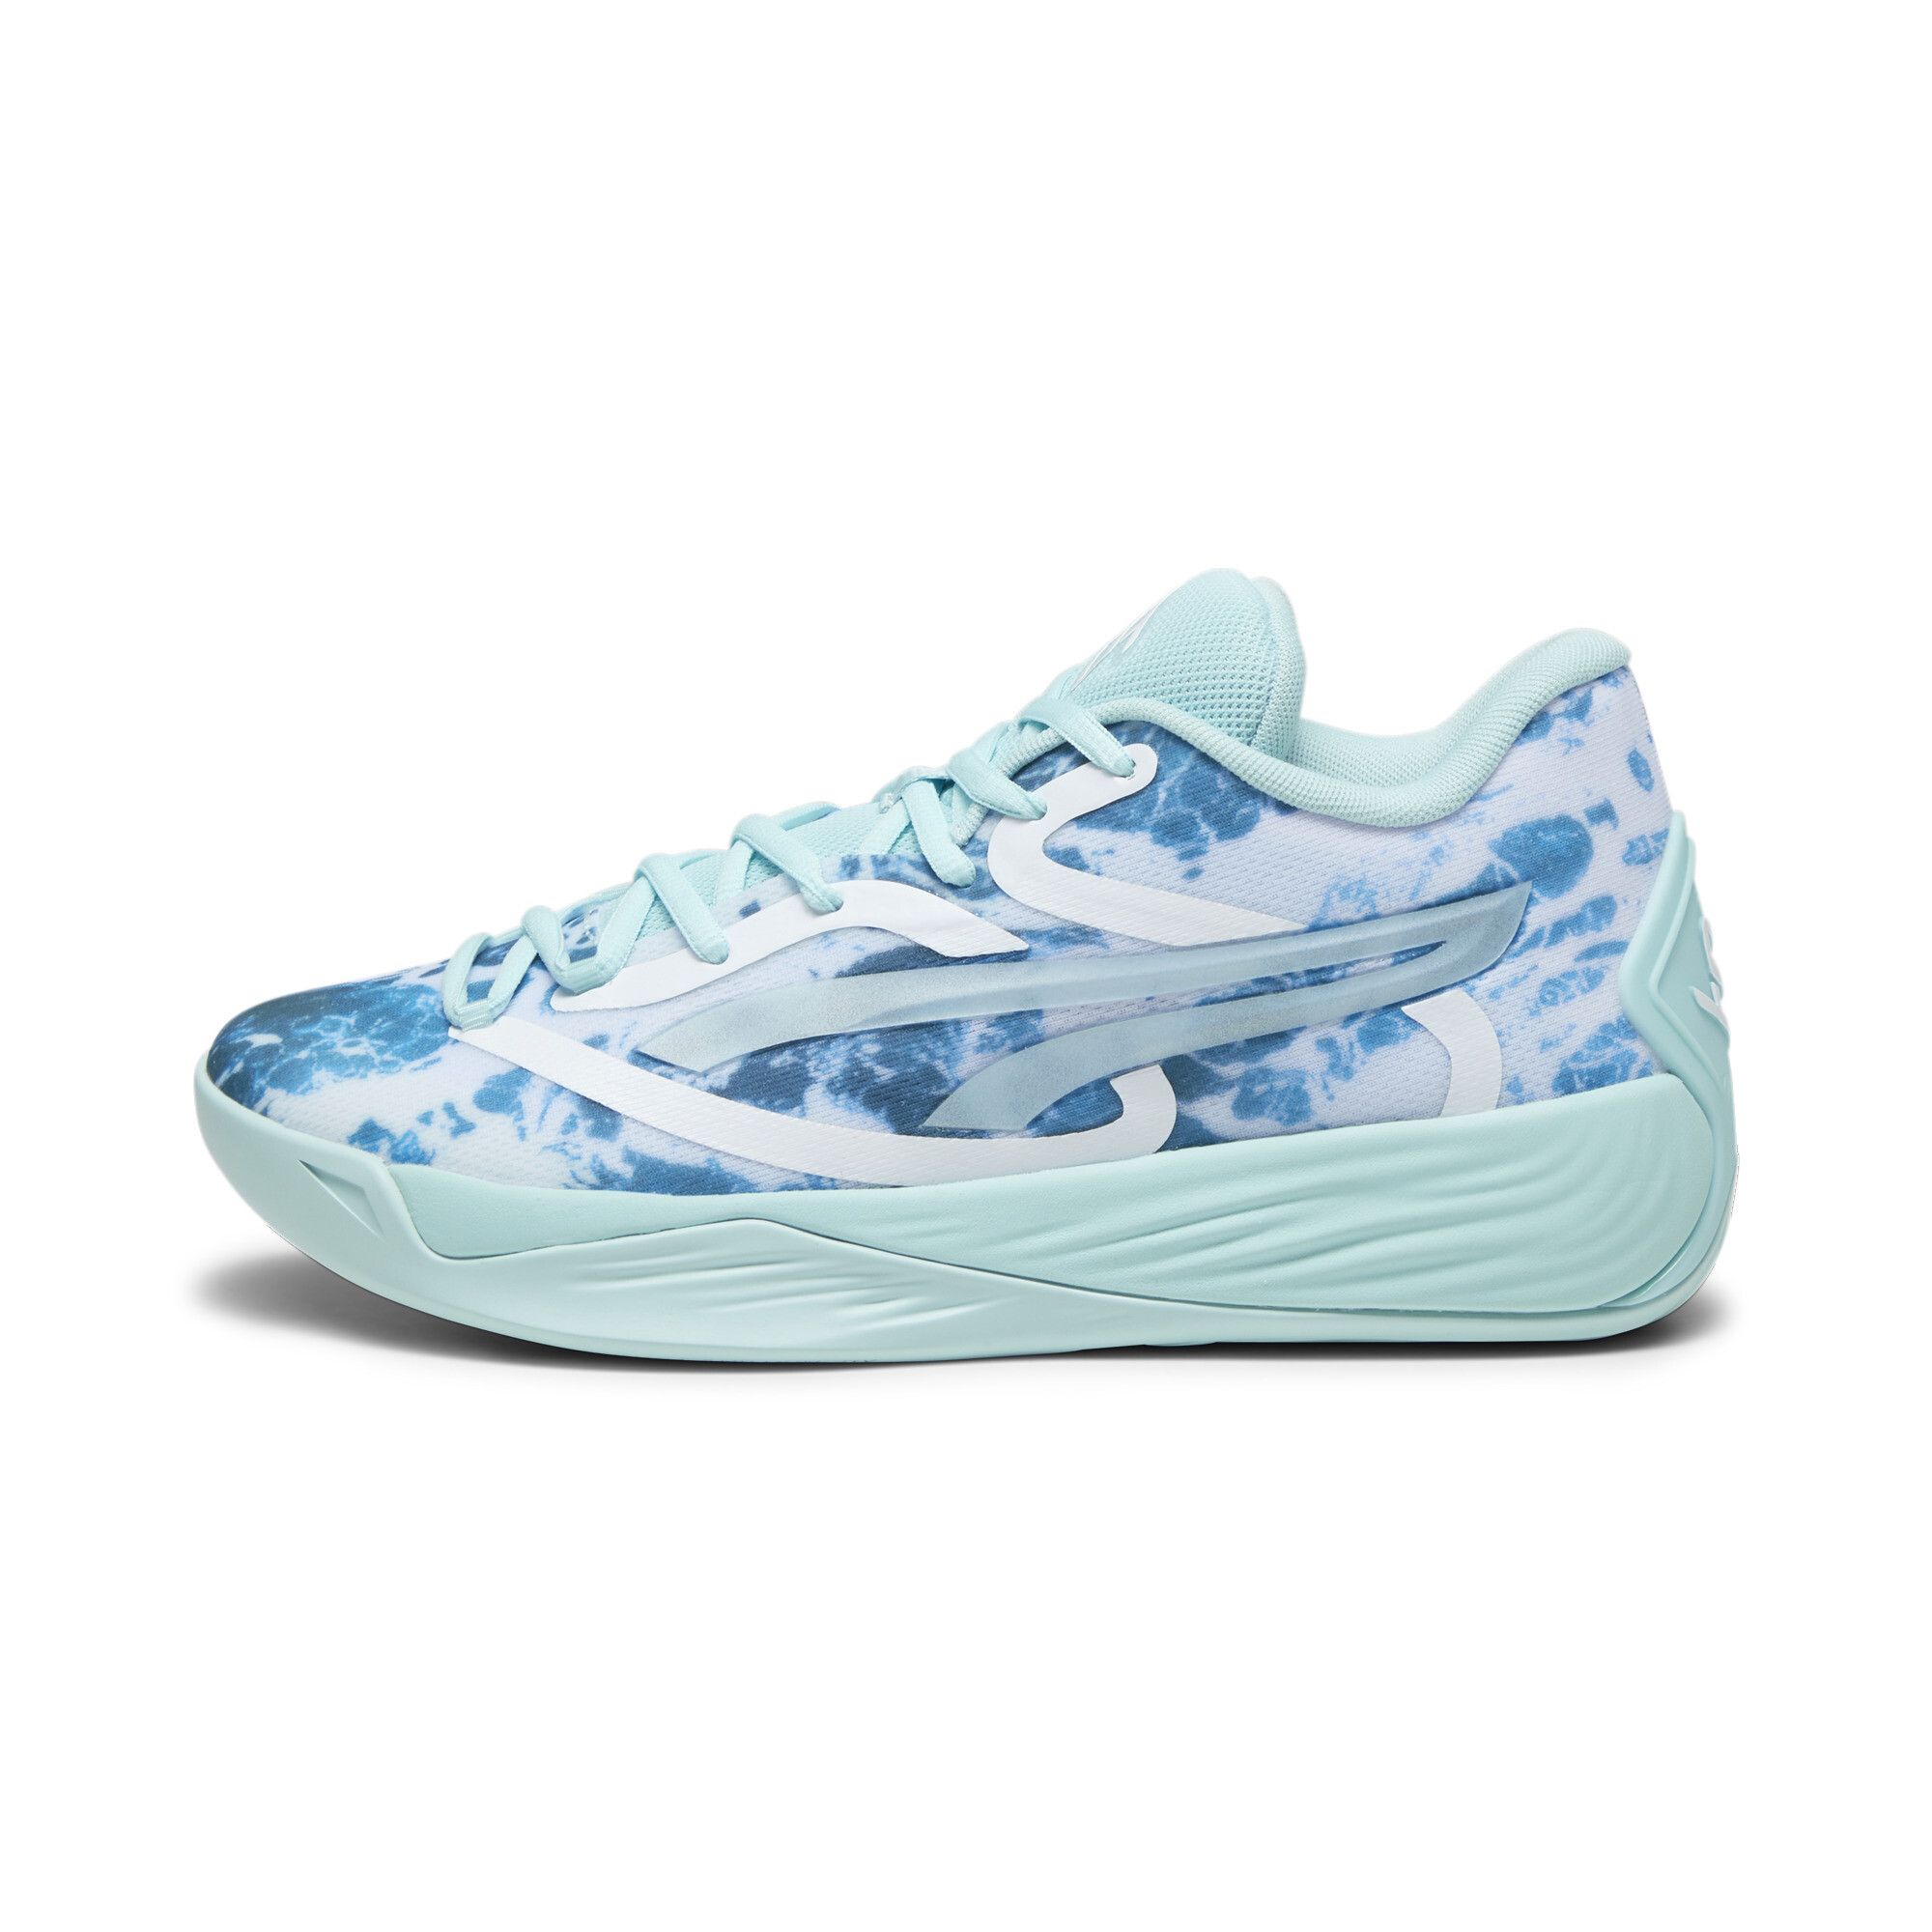 Women's Puma Stewie 2 Water's Basketball Shoes, Blue, Size 47, Shoes